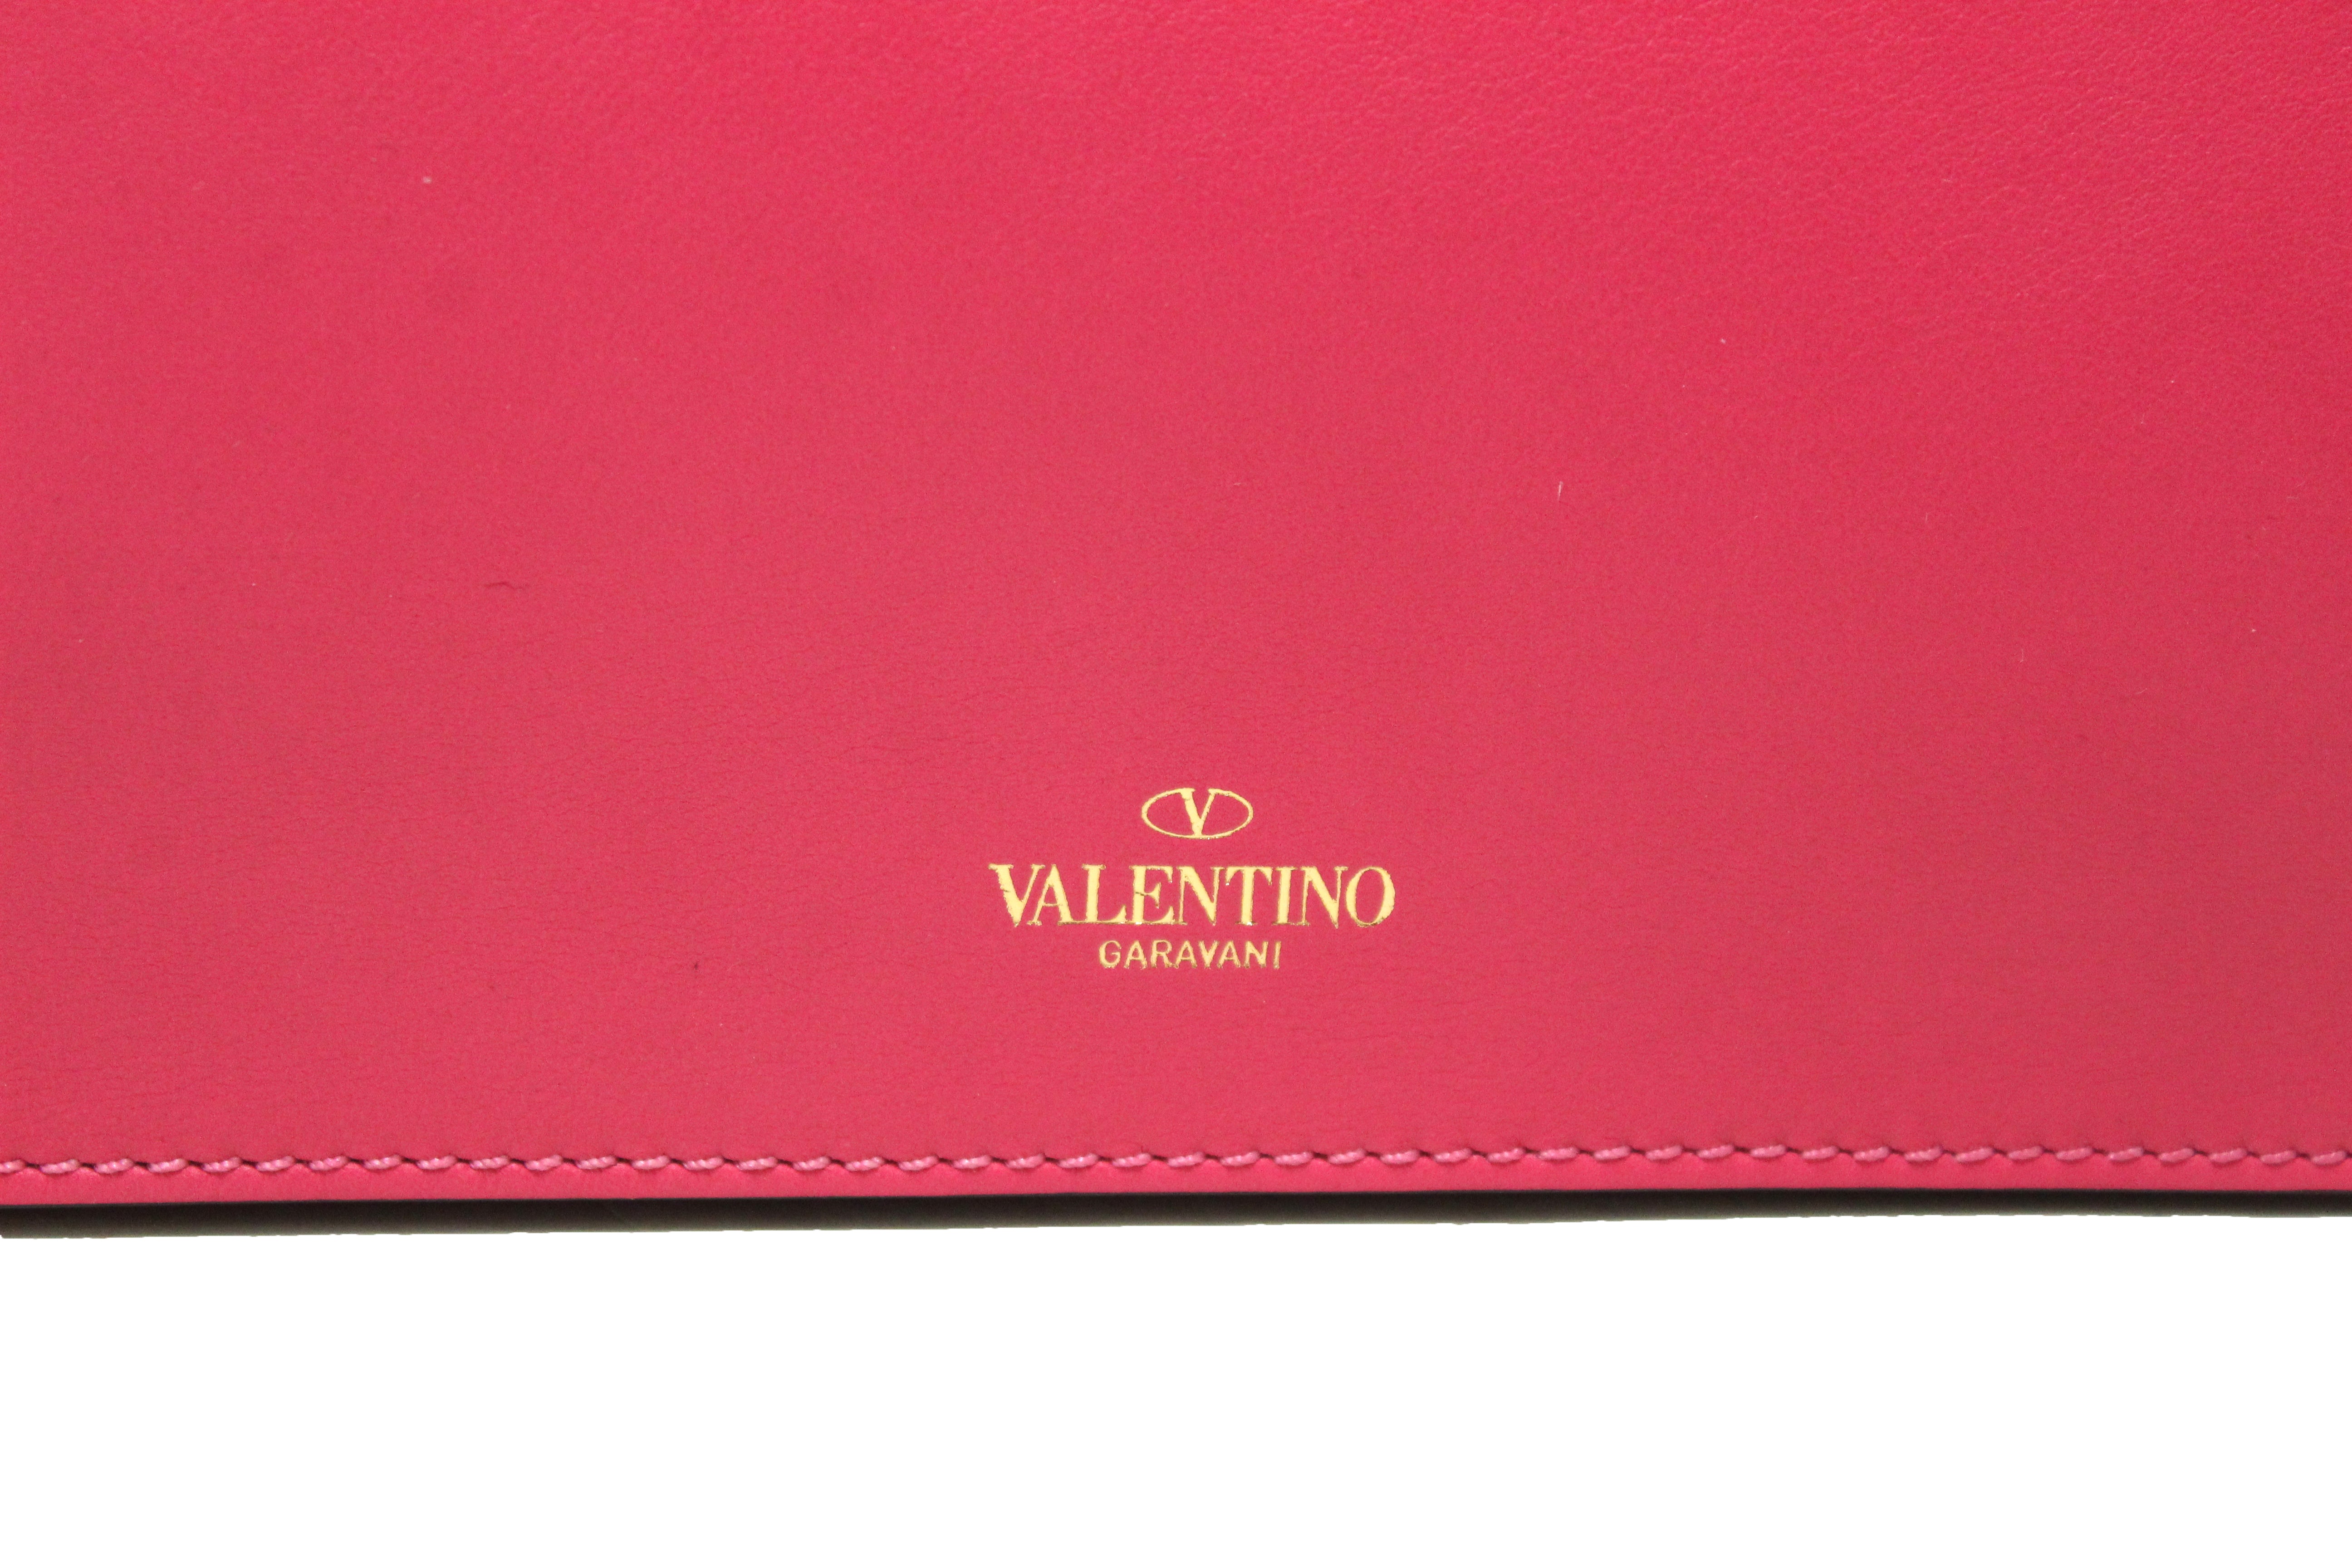 Authentic Valentino Hot Fuchsia Pink Leather Long Clutch Bag